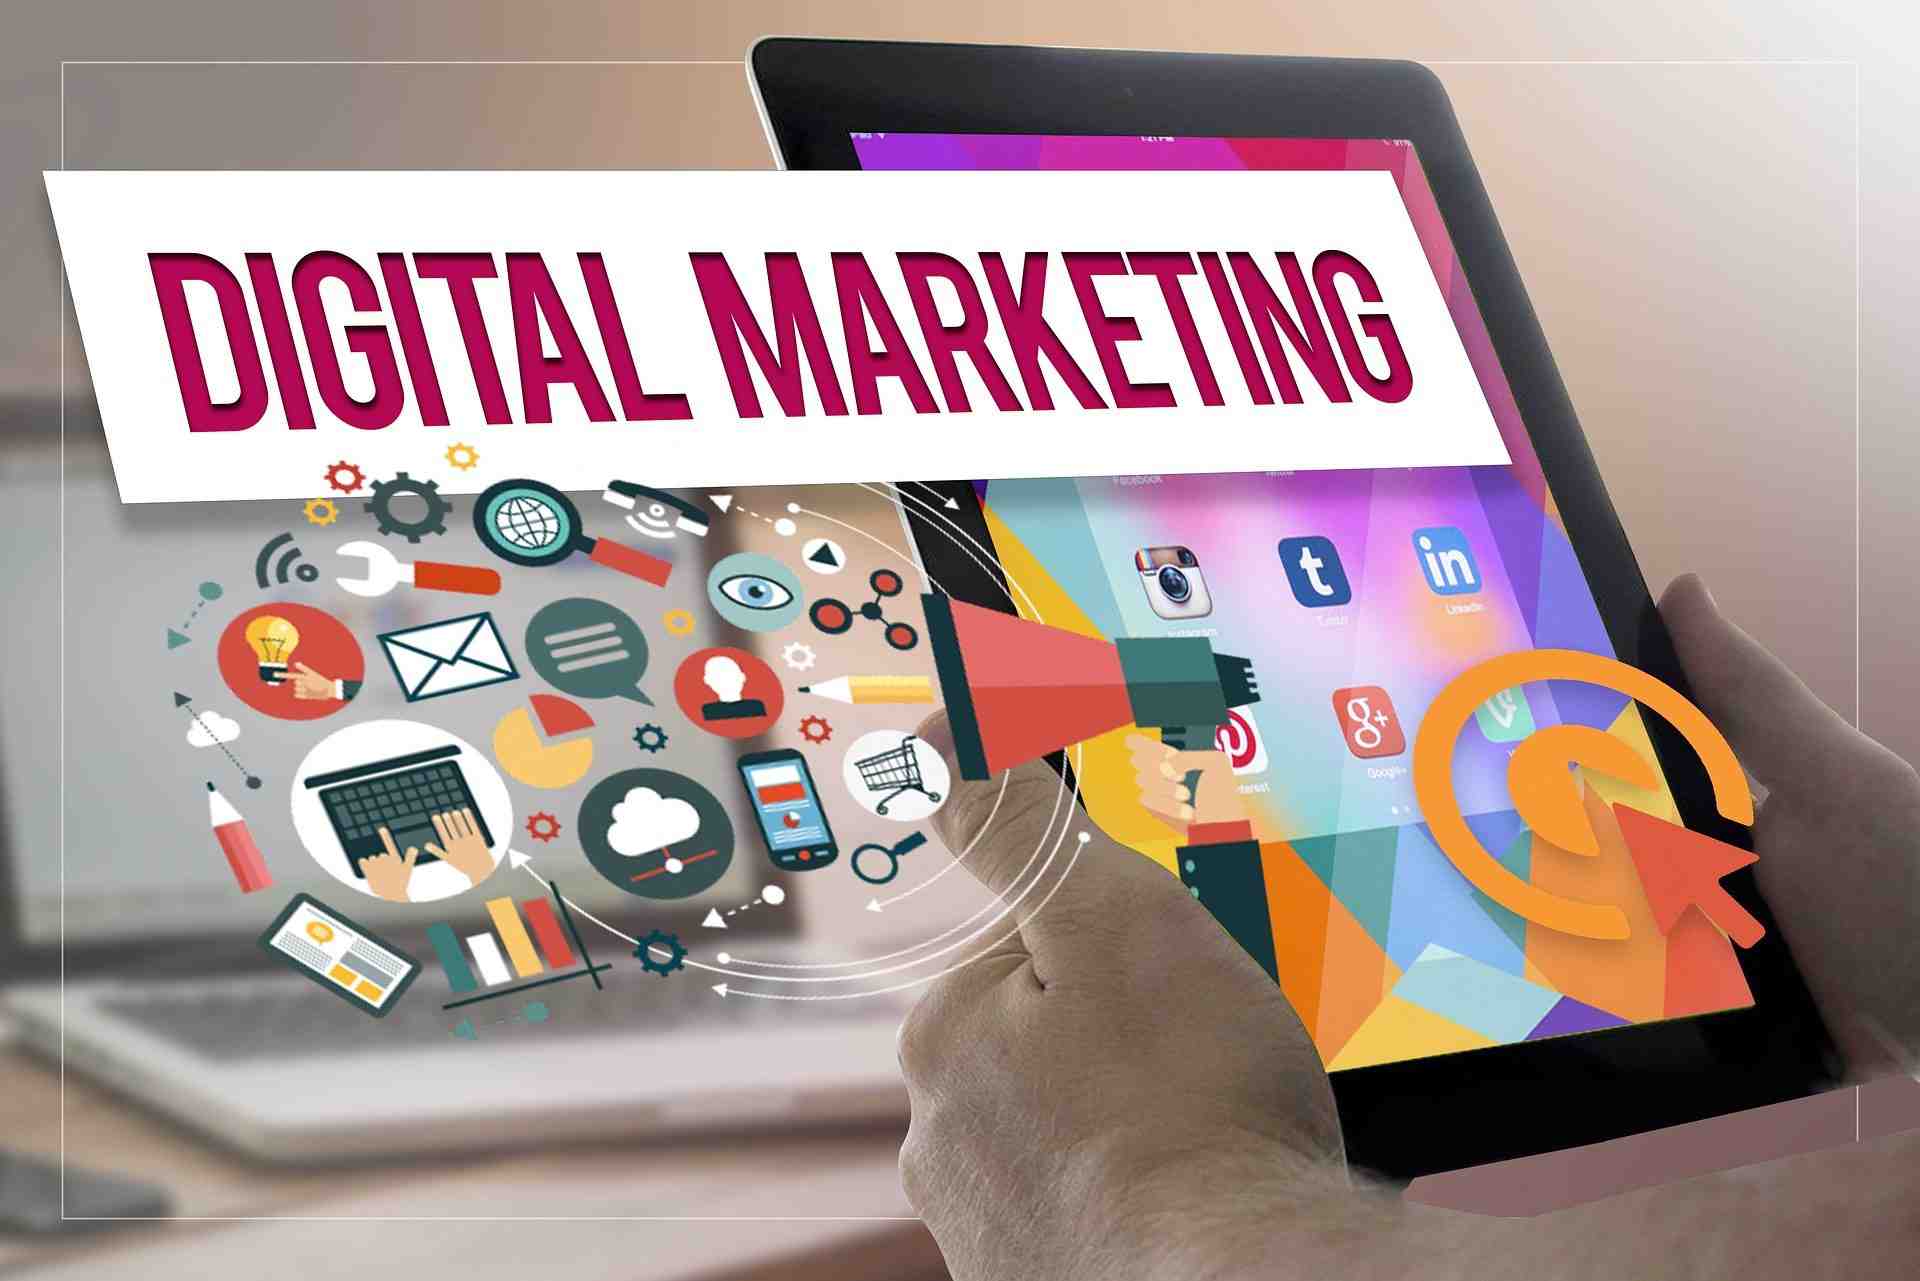 Which certificate of digital marketing is best?